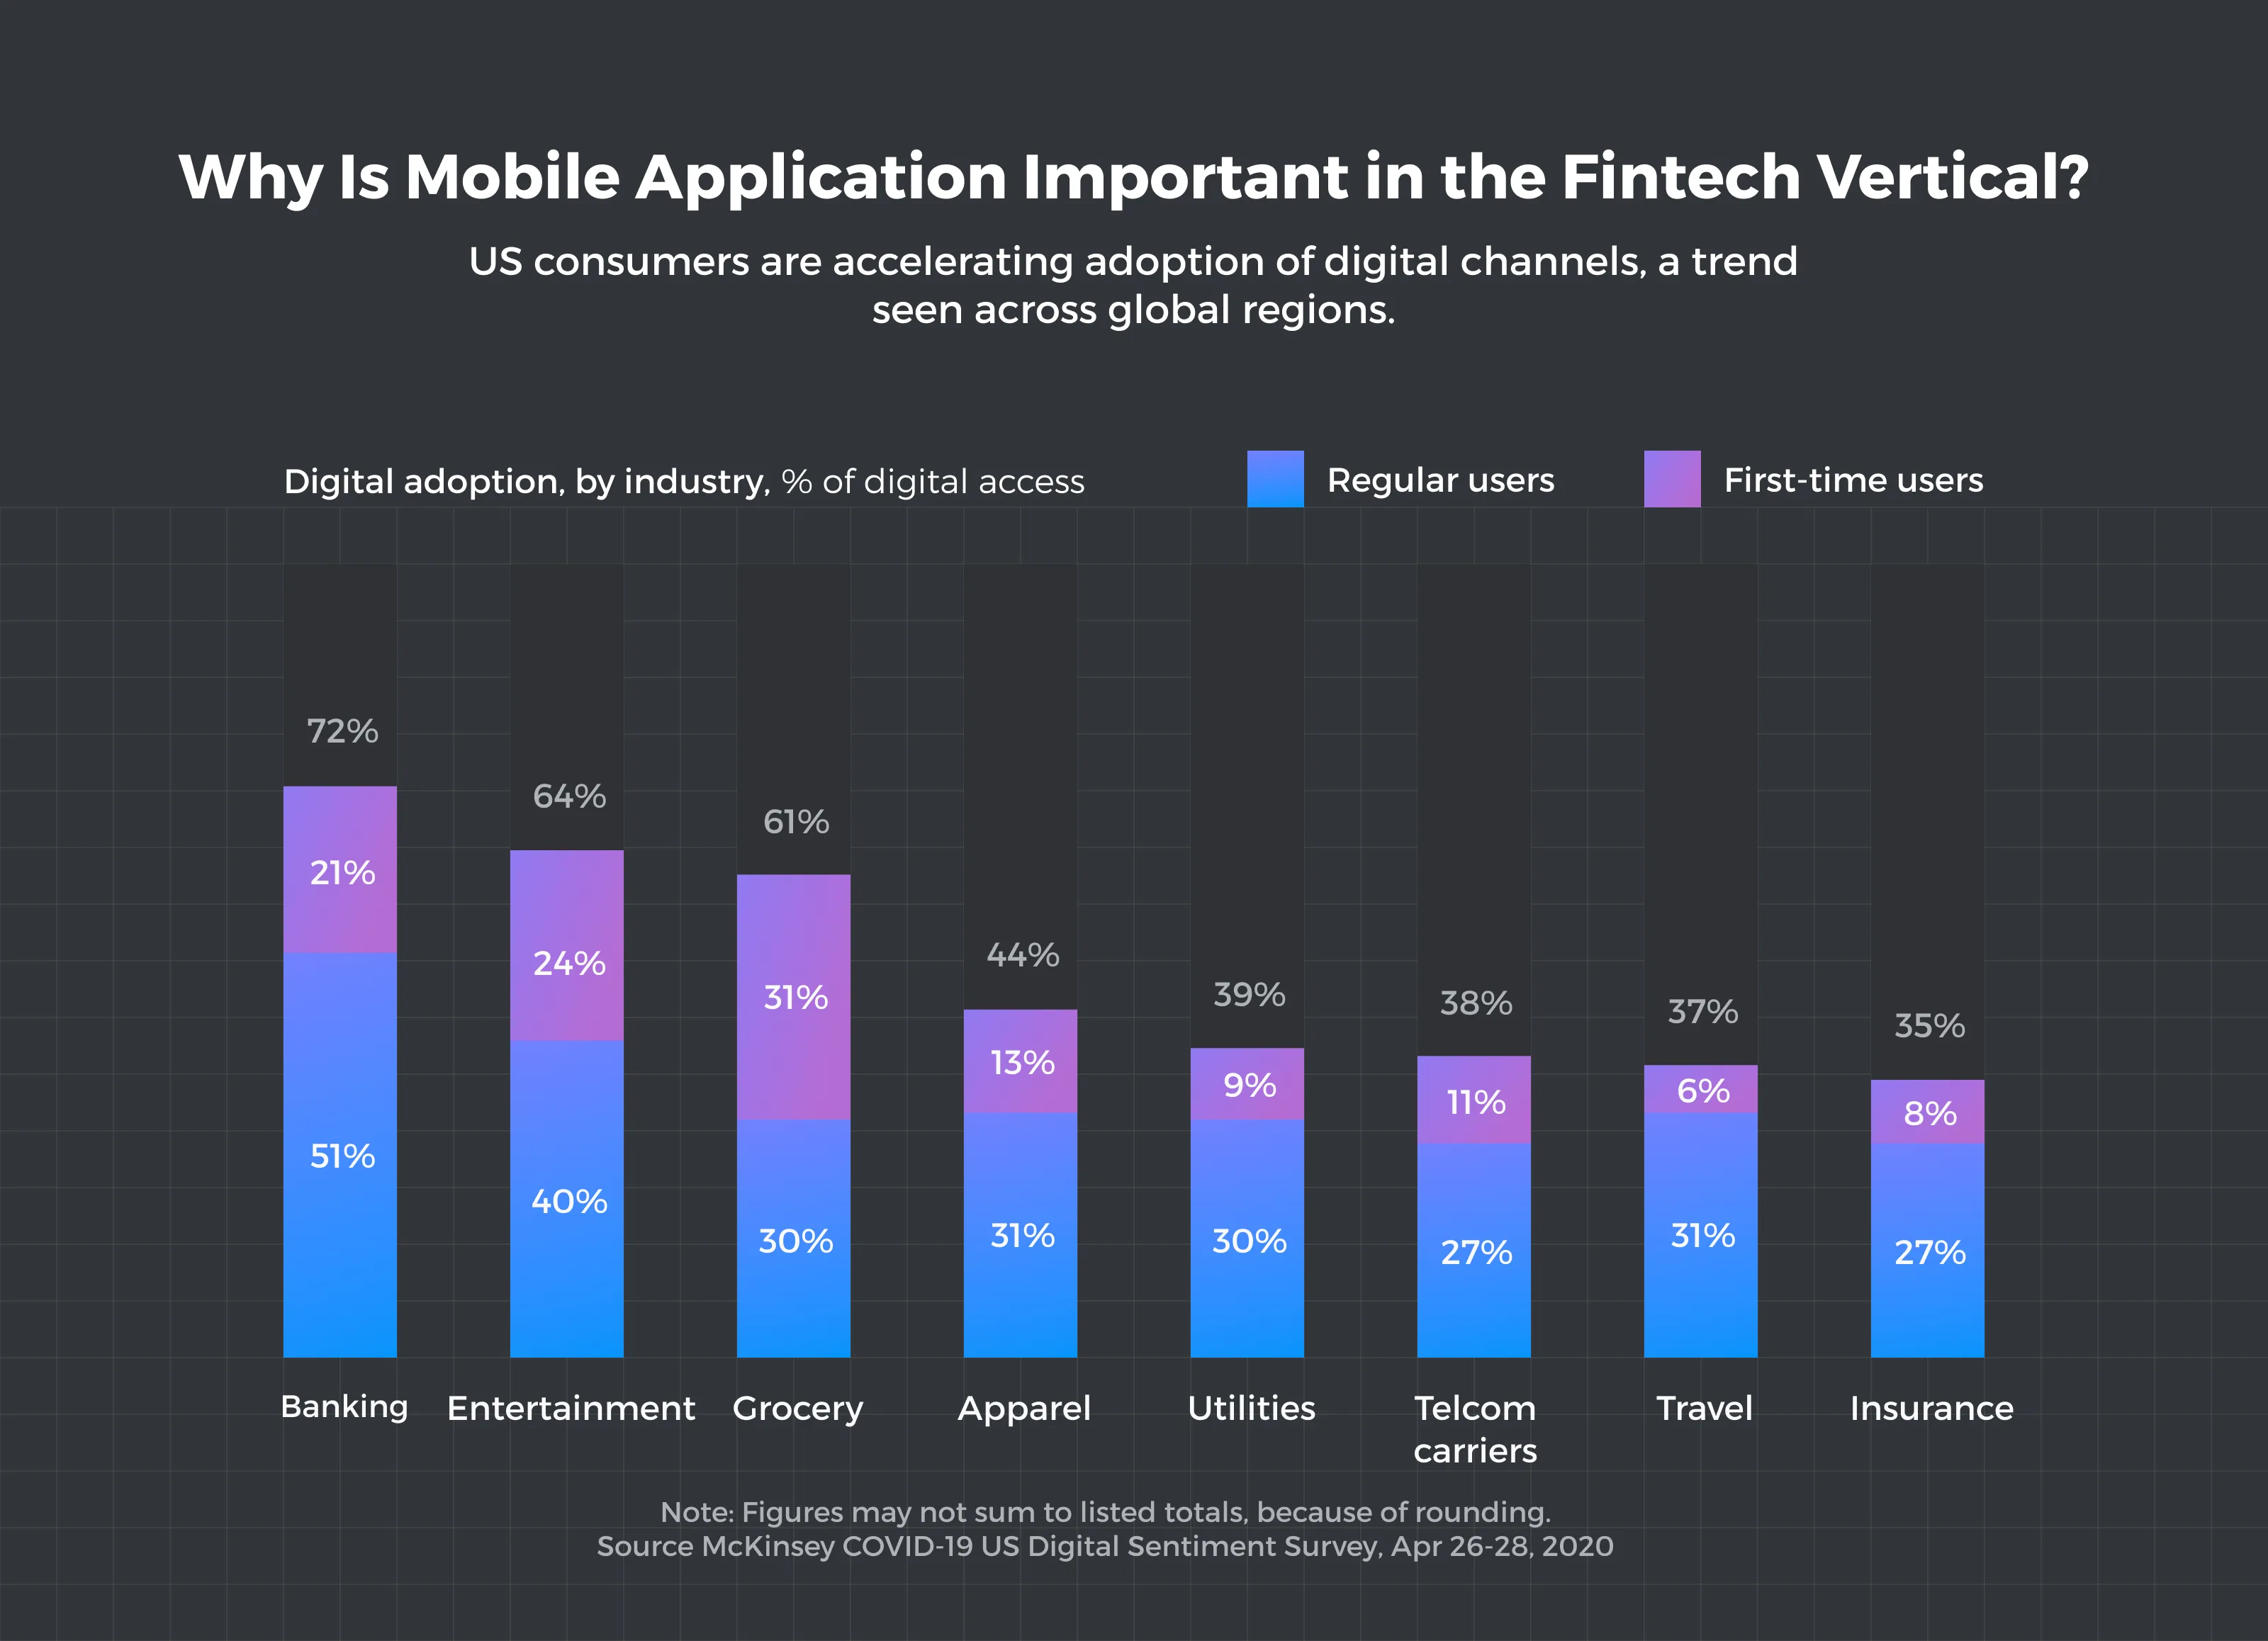 Why Is Mobile Application Important in the Fintech Vertical?